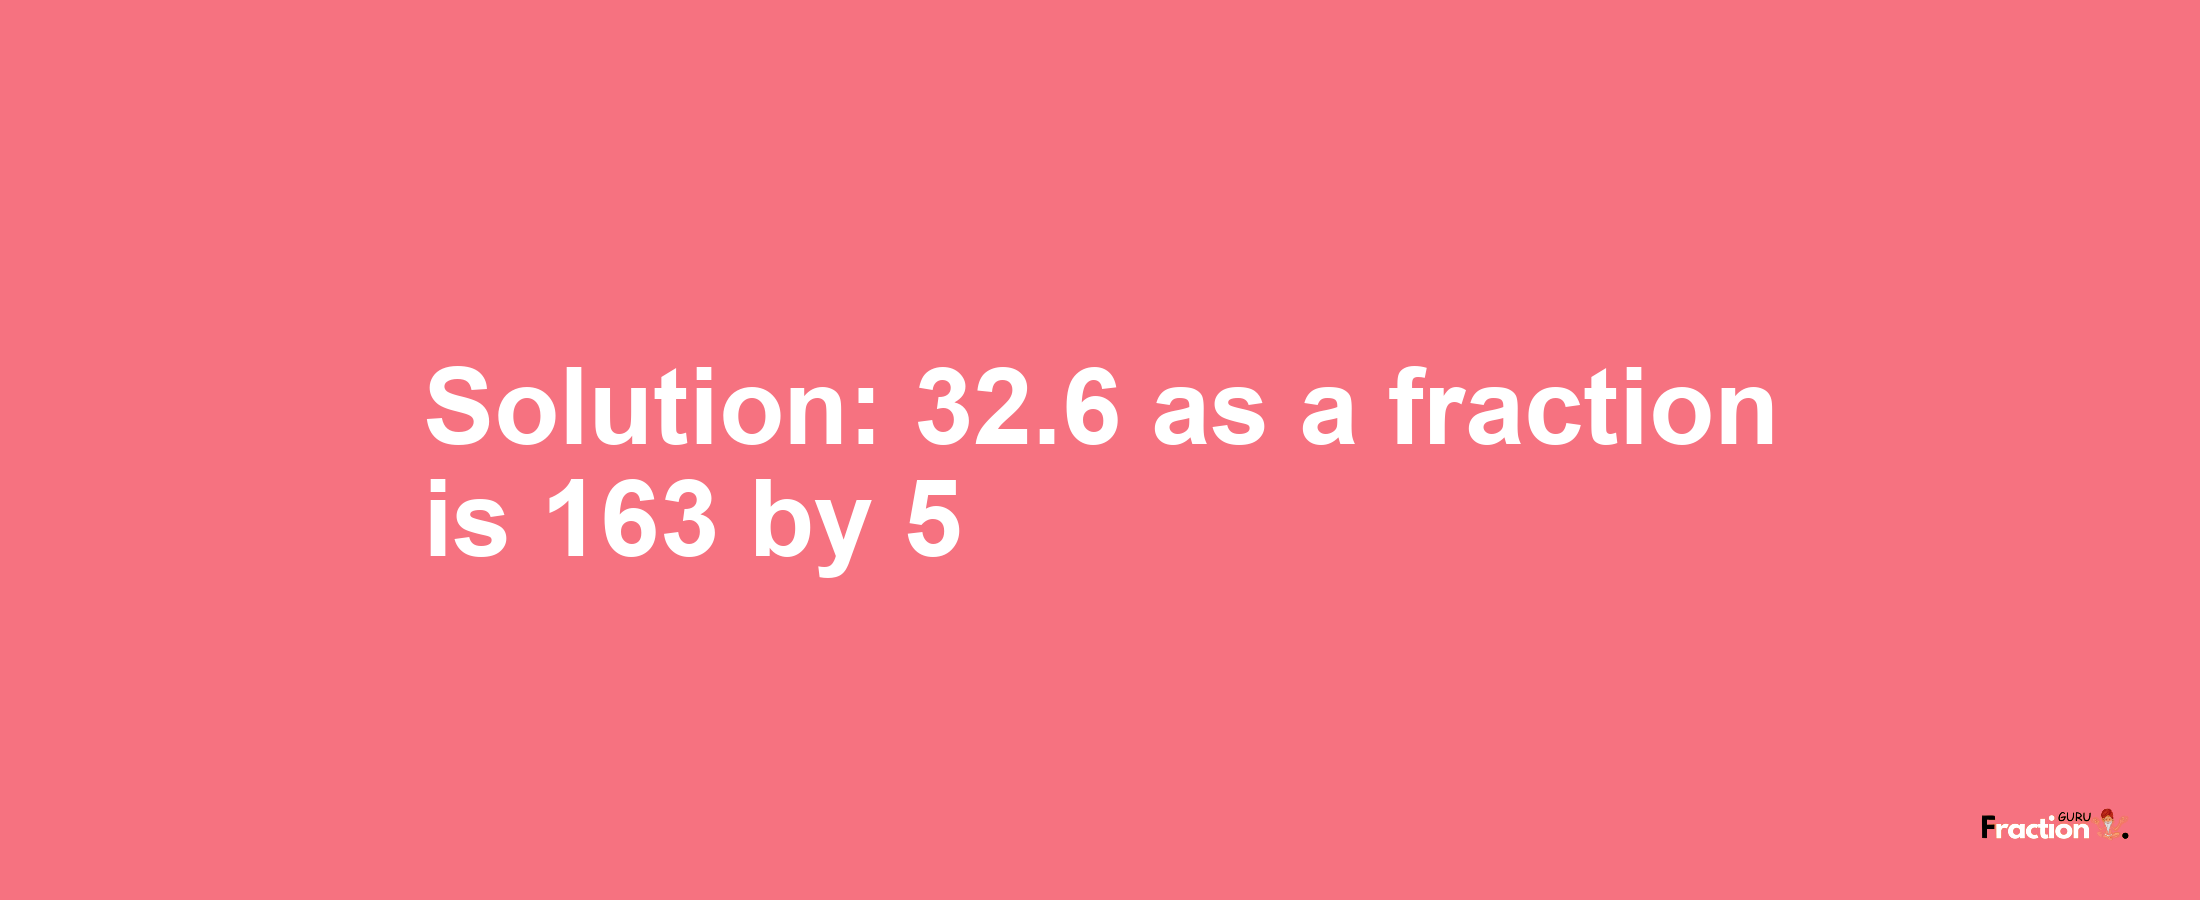 Solution:32.6 as a fraction is 163/5